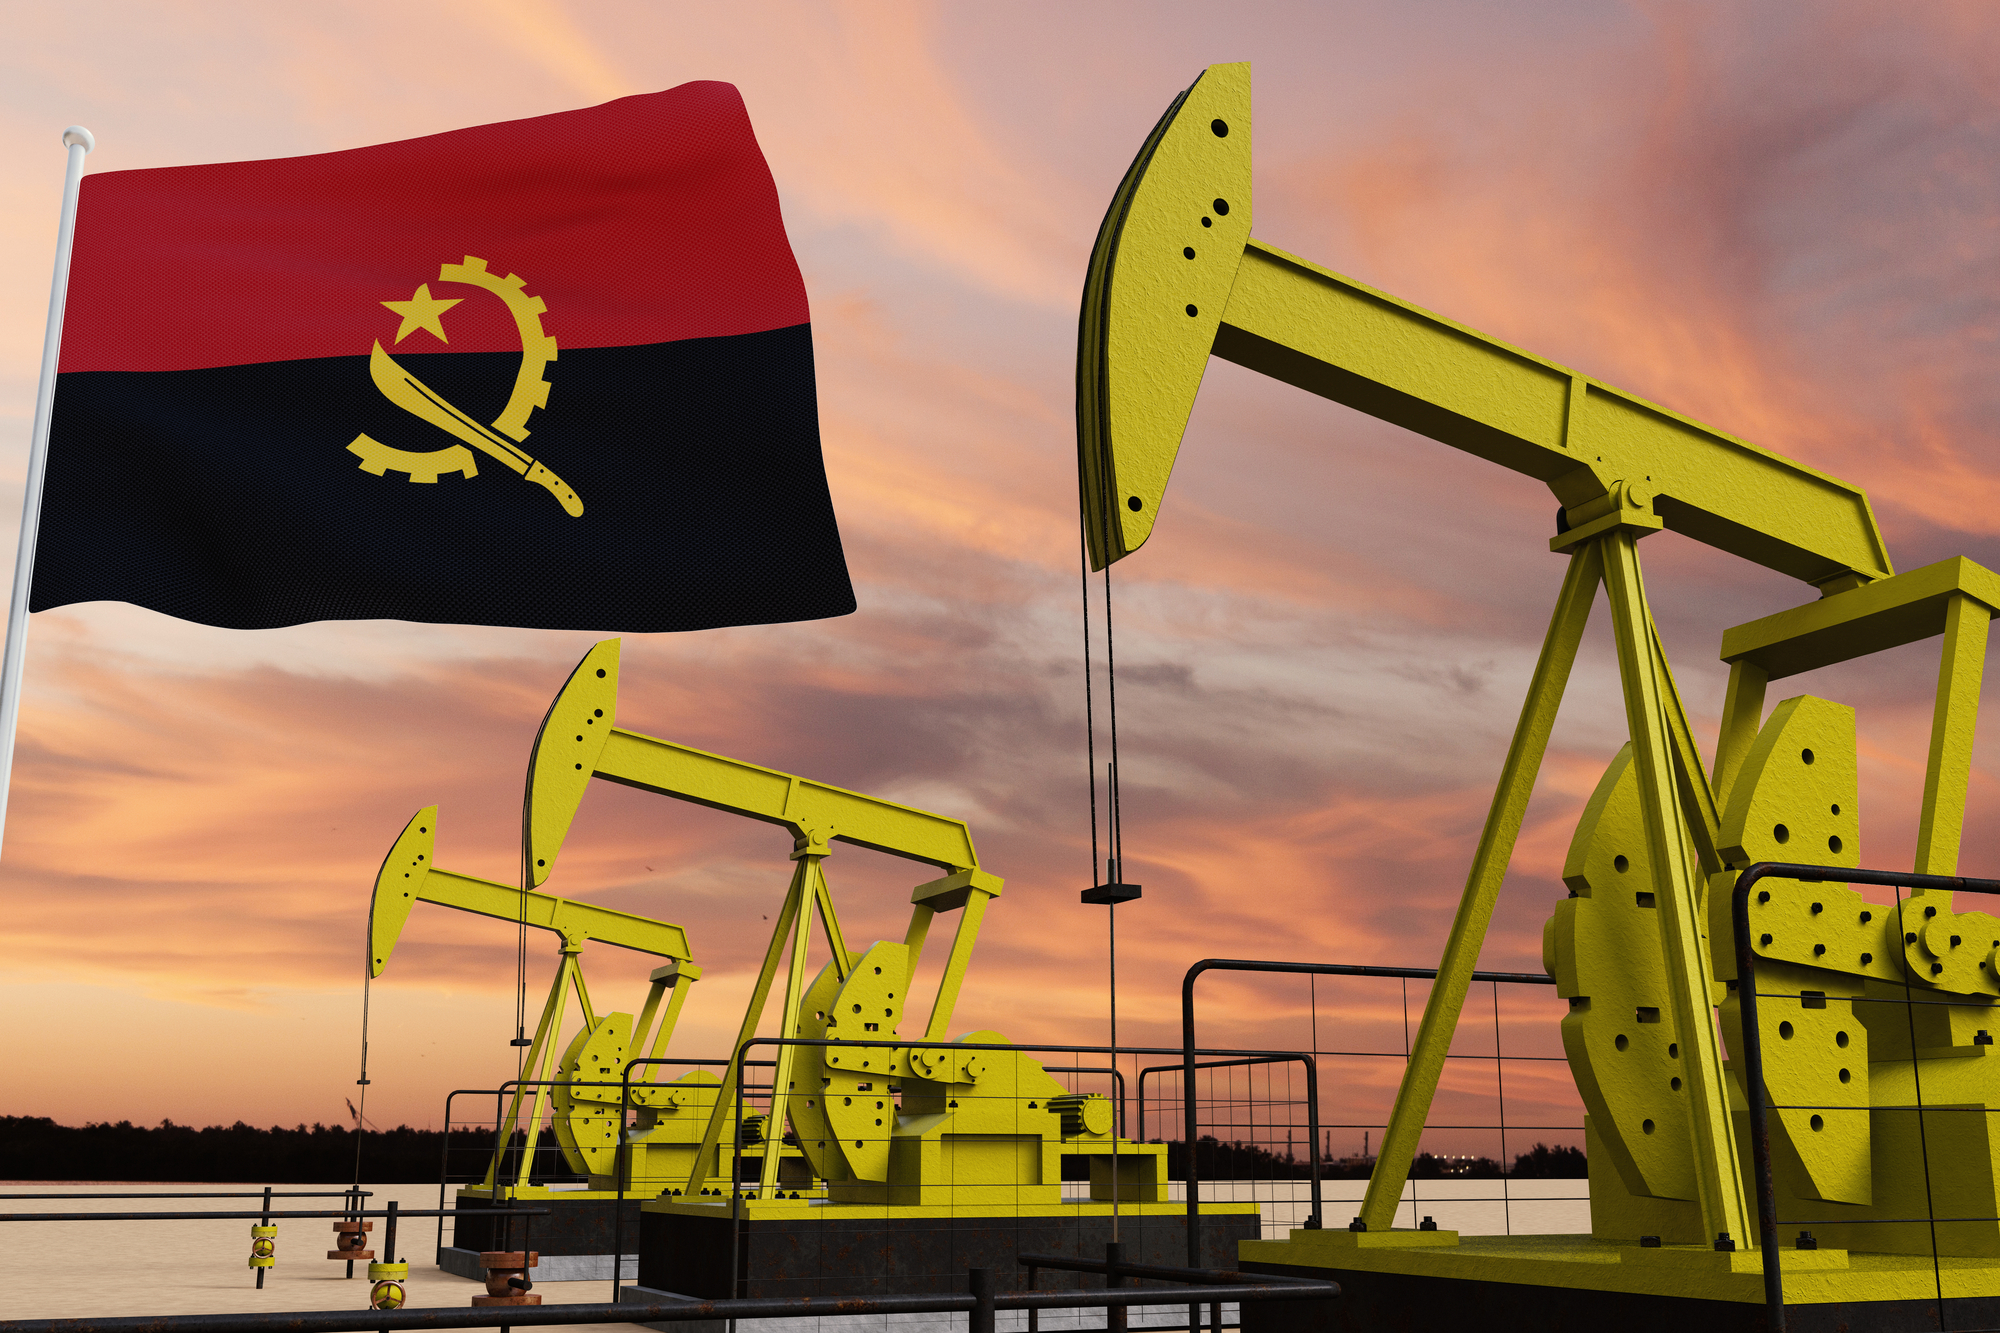 angola oil and gas sector